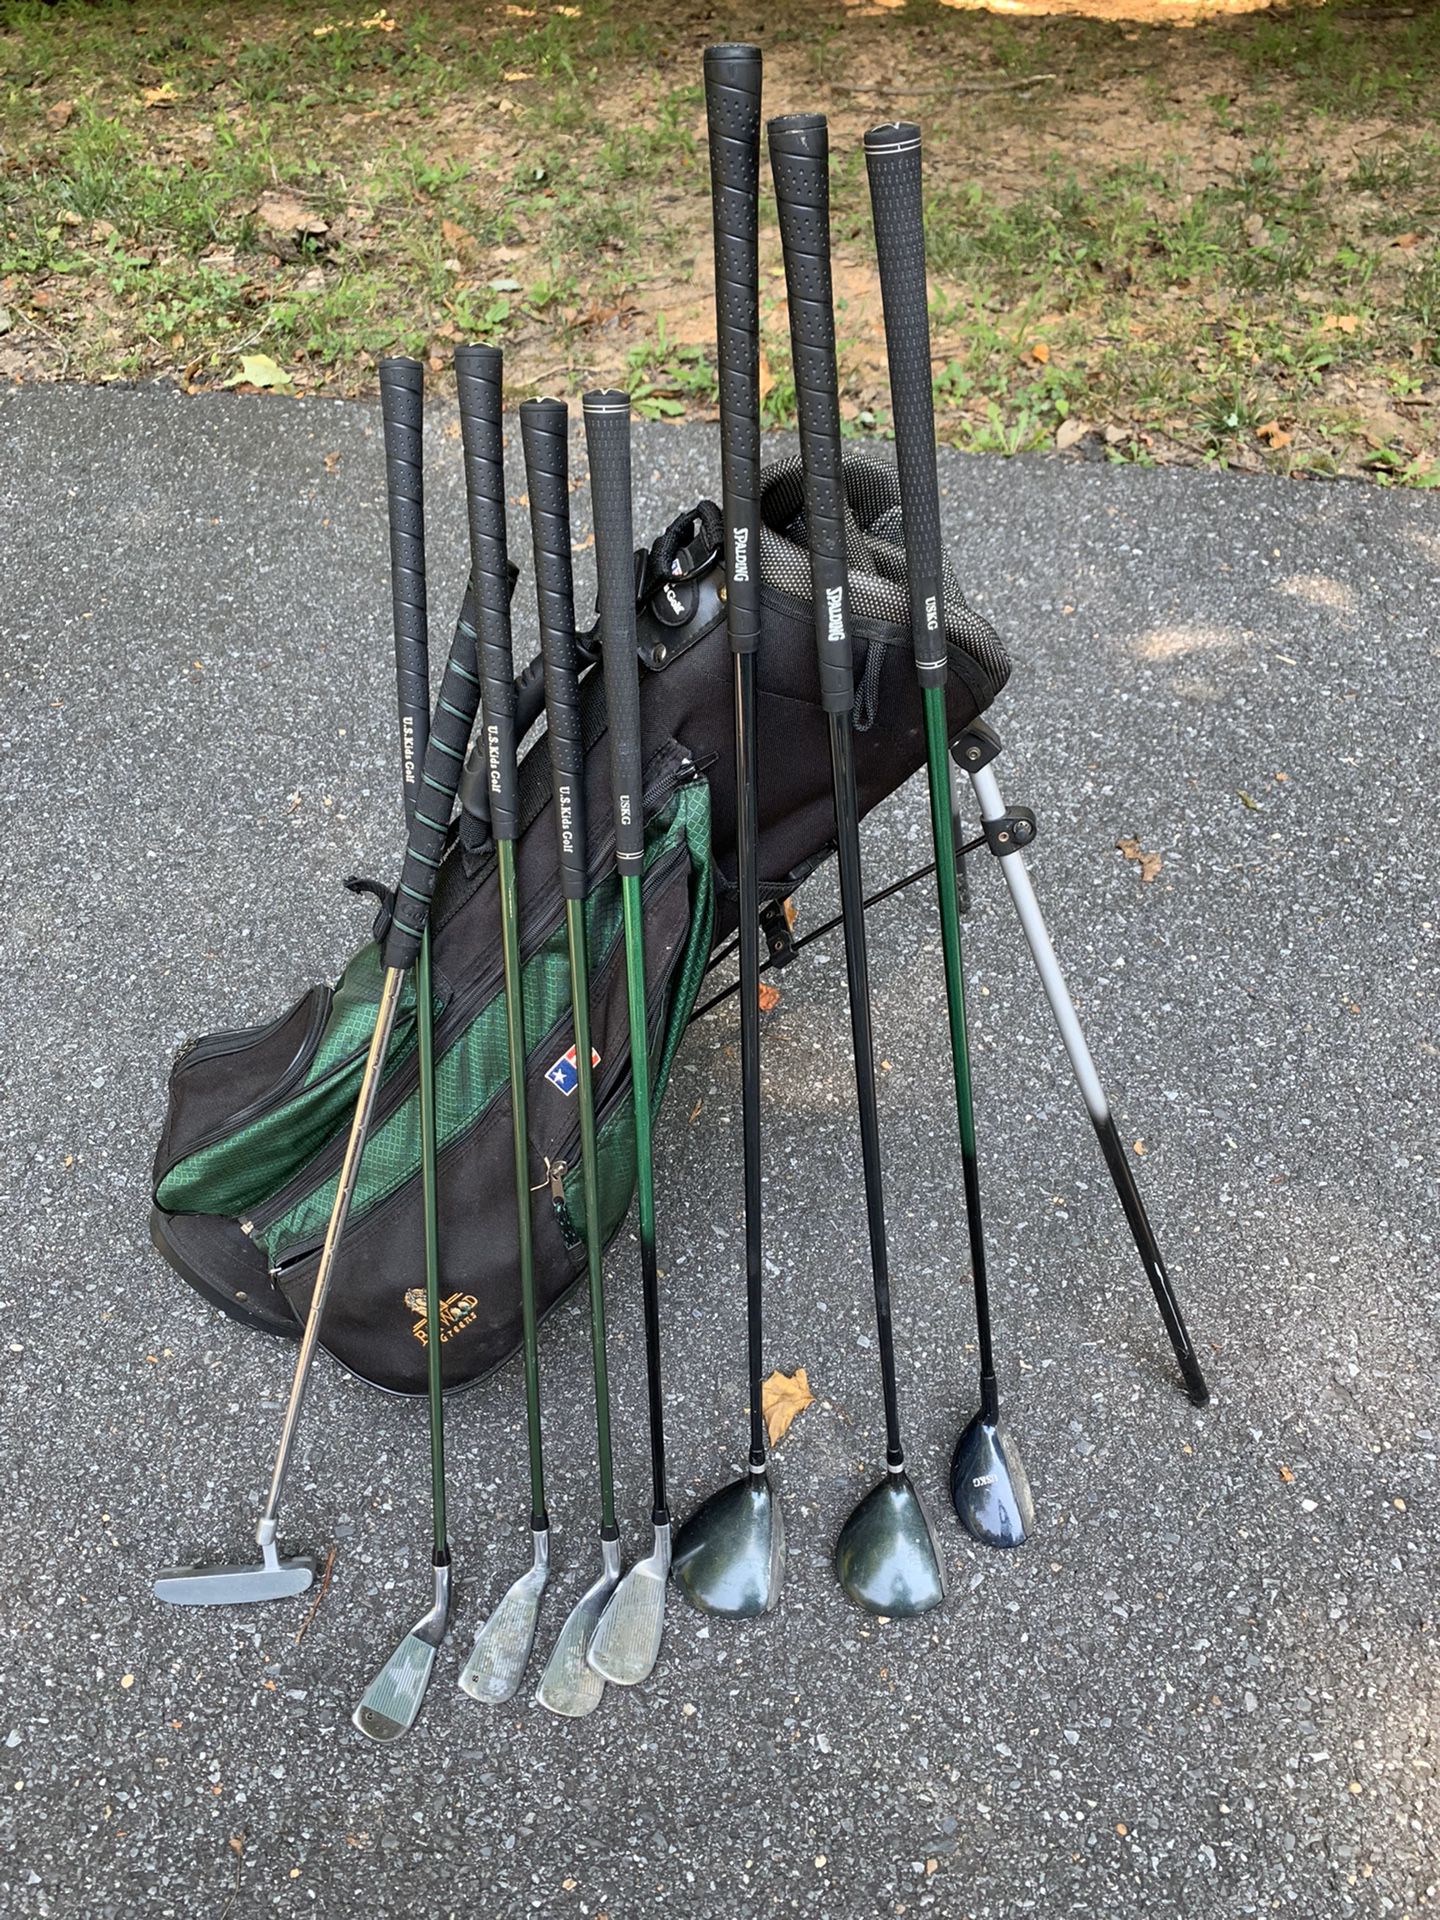 US Kids Golf Clubs and Bag (Green clubs)